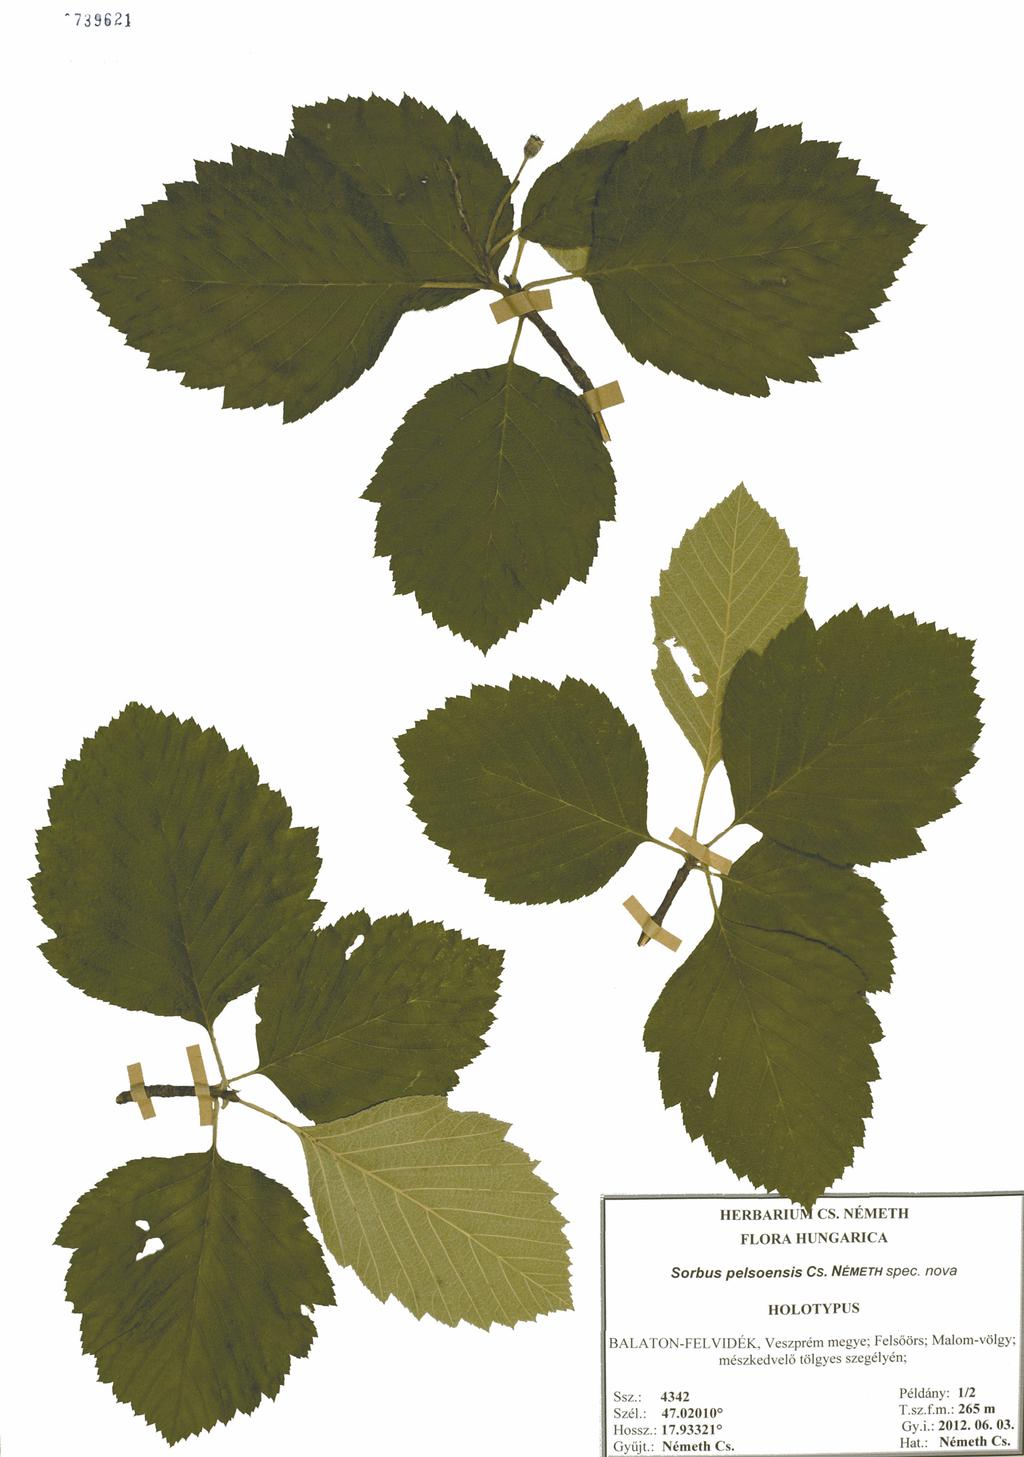 SORBUS PELSOENSIS, A NEW SPECIES FROM HUNGARY